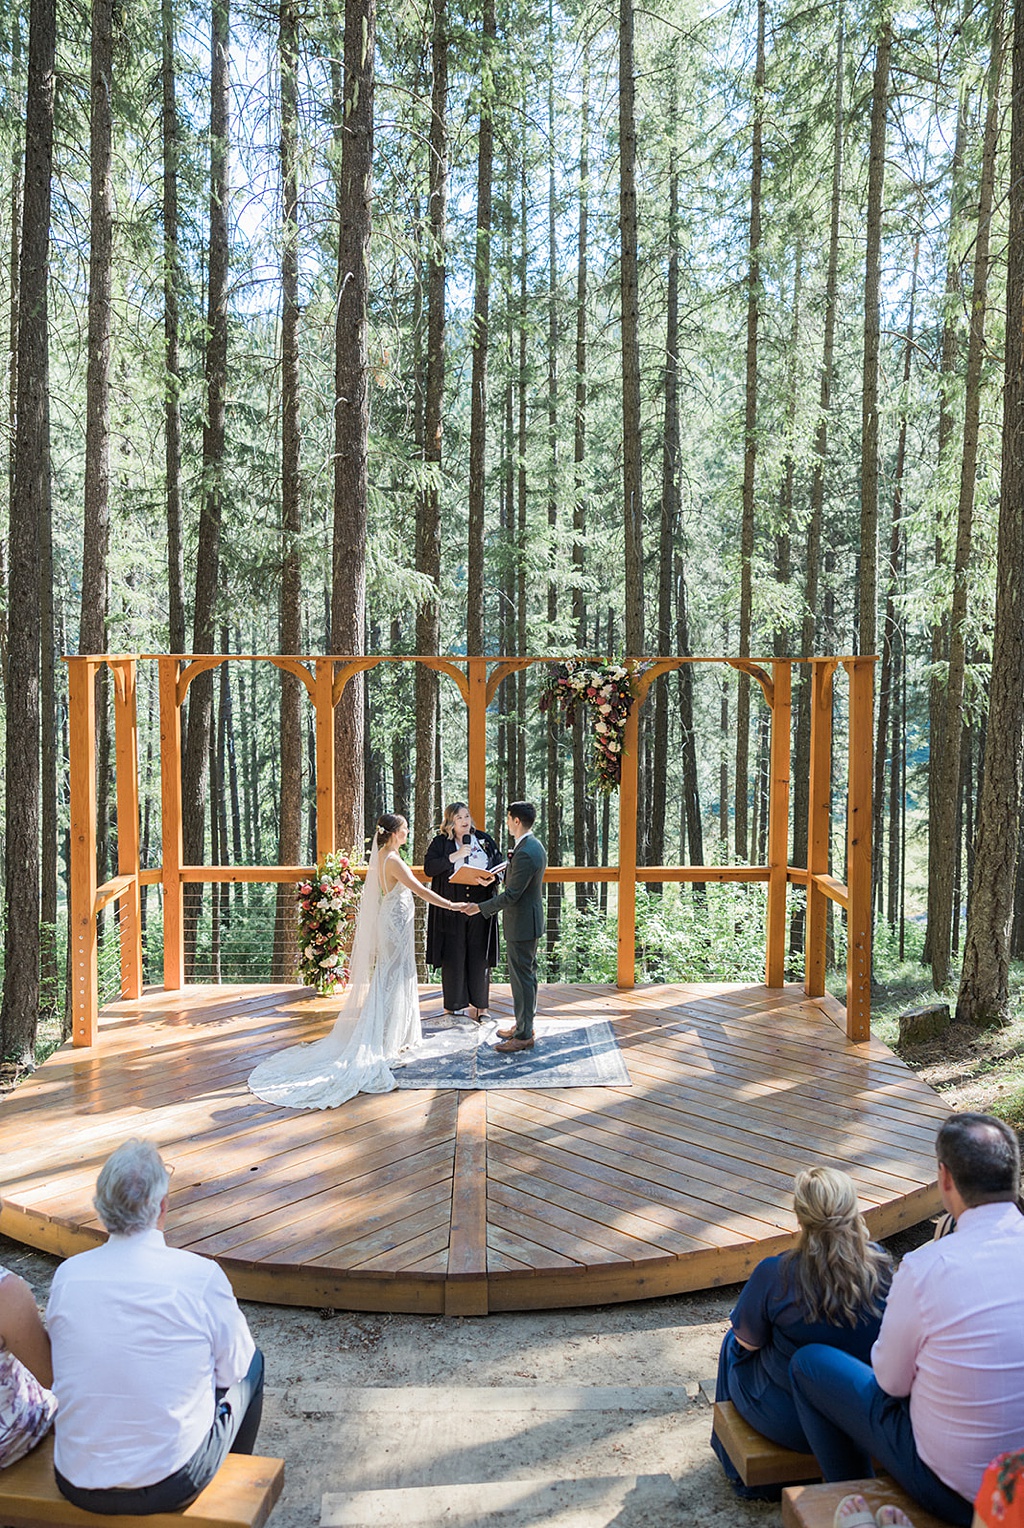 The tall pine trees and wedding florals provide a stunning ceremony backdrop for this Tierra Retreat Center wedding